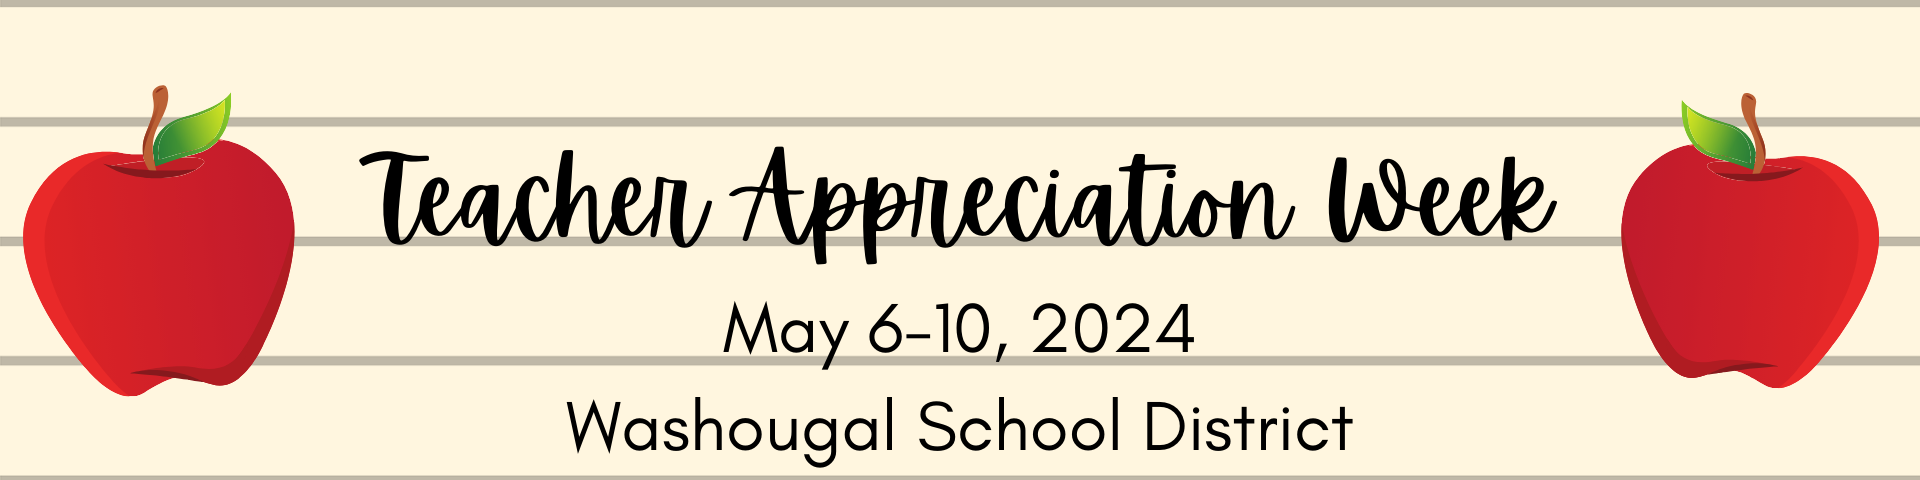 Teacher appreciation week, may 6-10, Washougal school district with apple on lined paper graphic